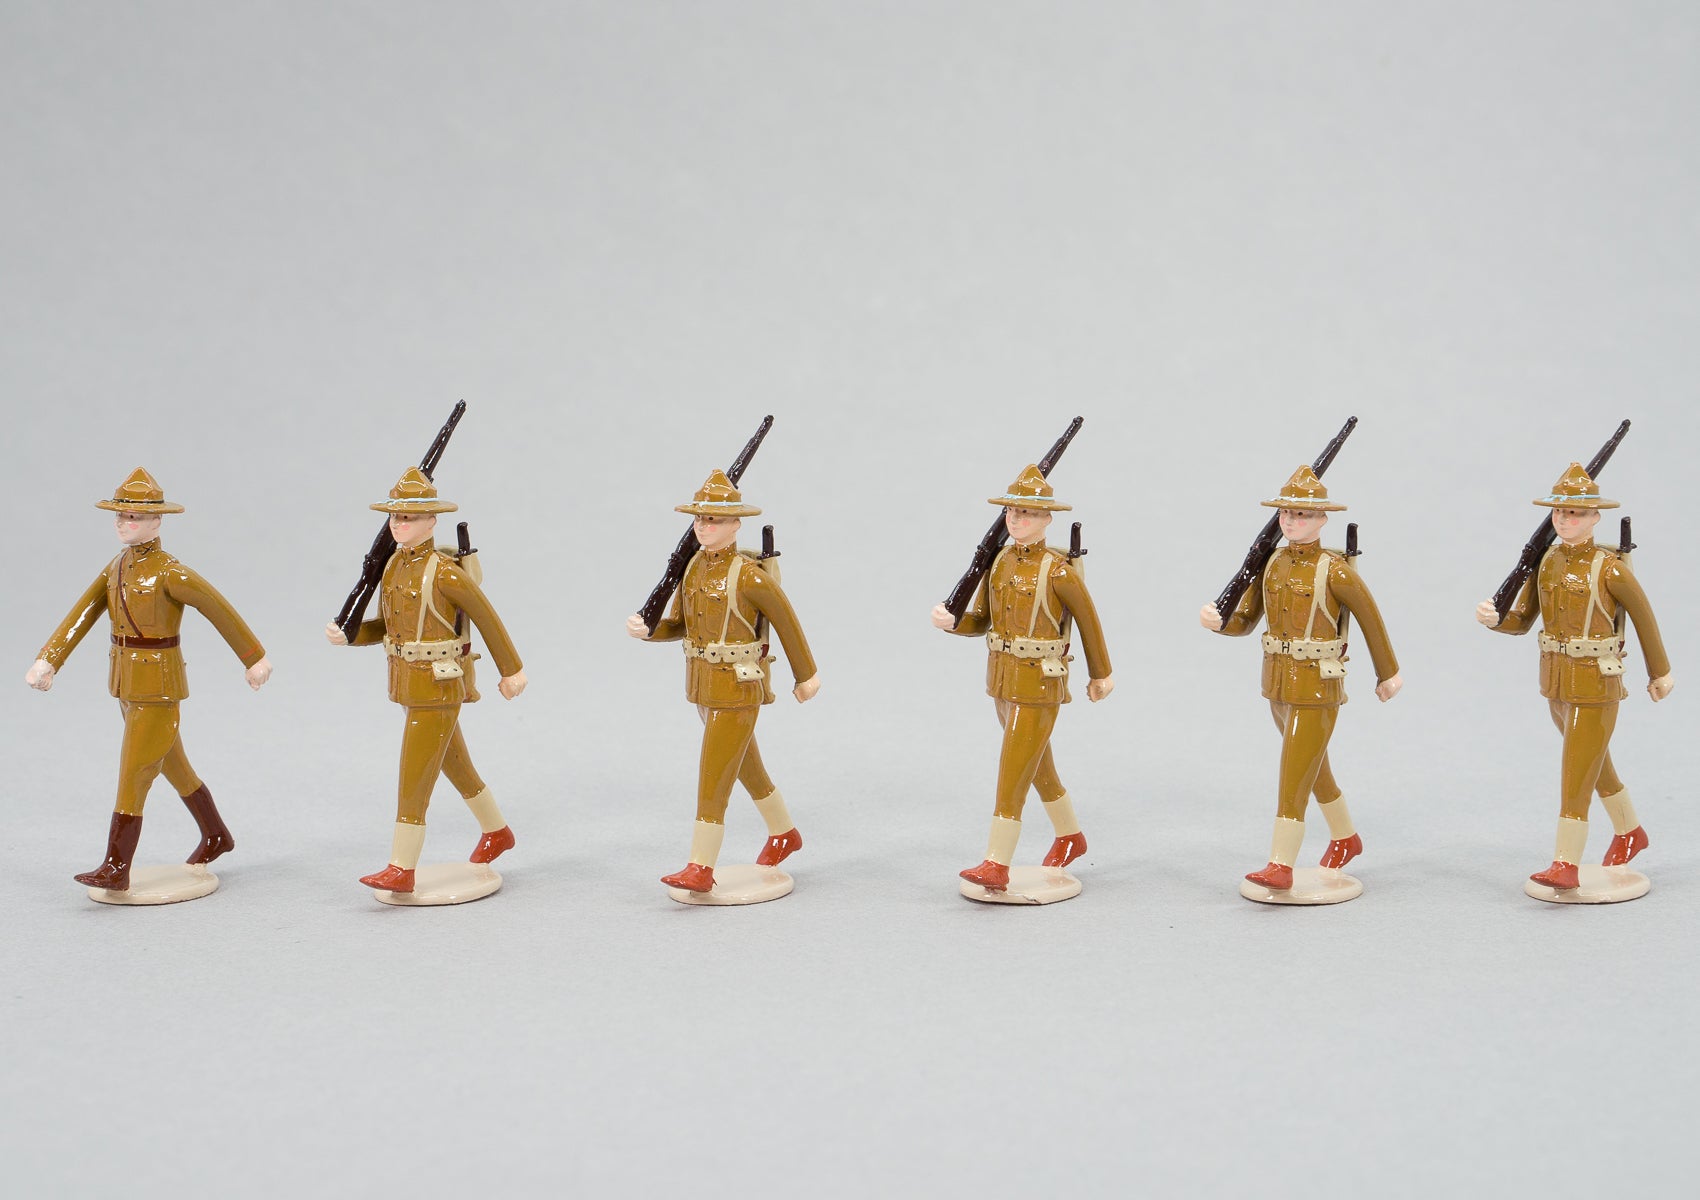 155 US 16th Infantry Regiment "Doughboys", 1917